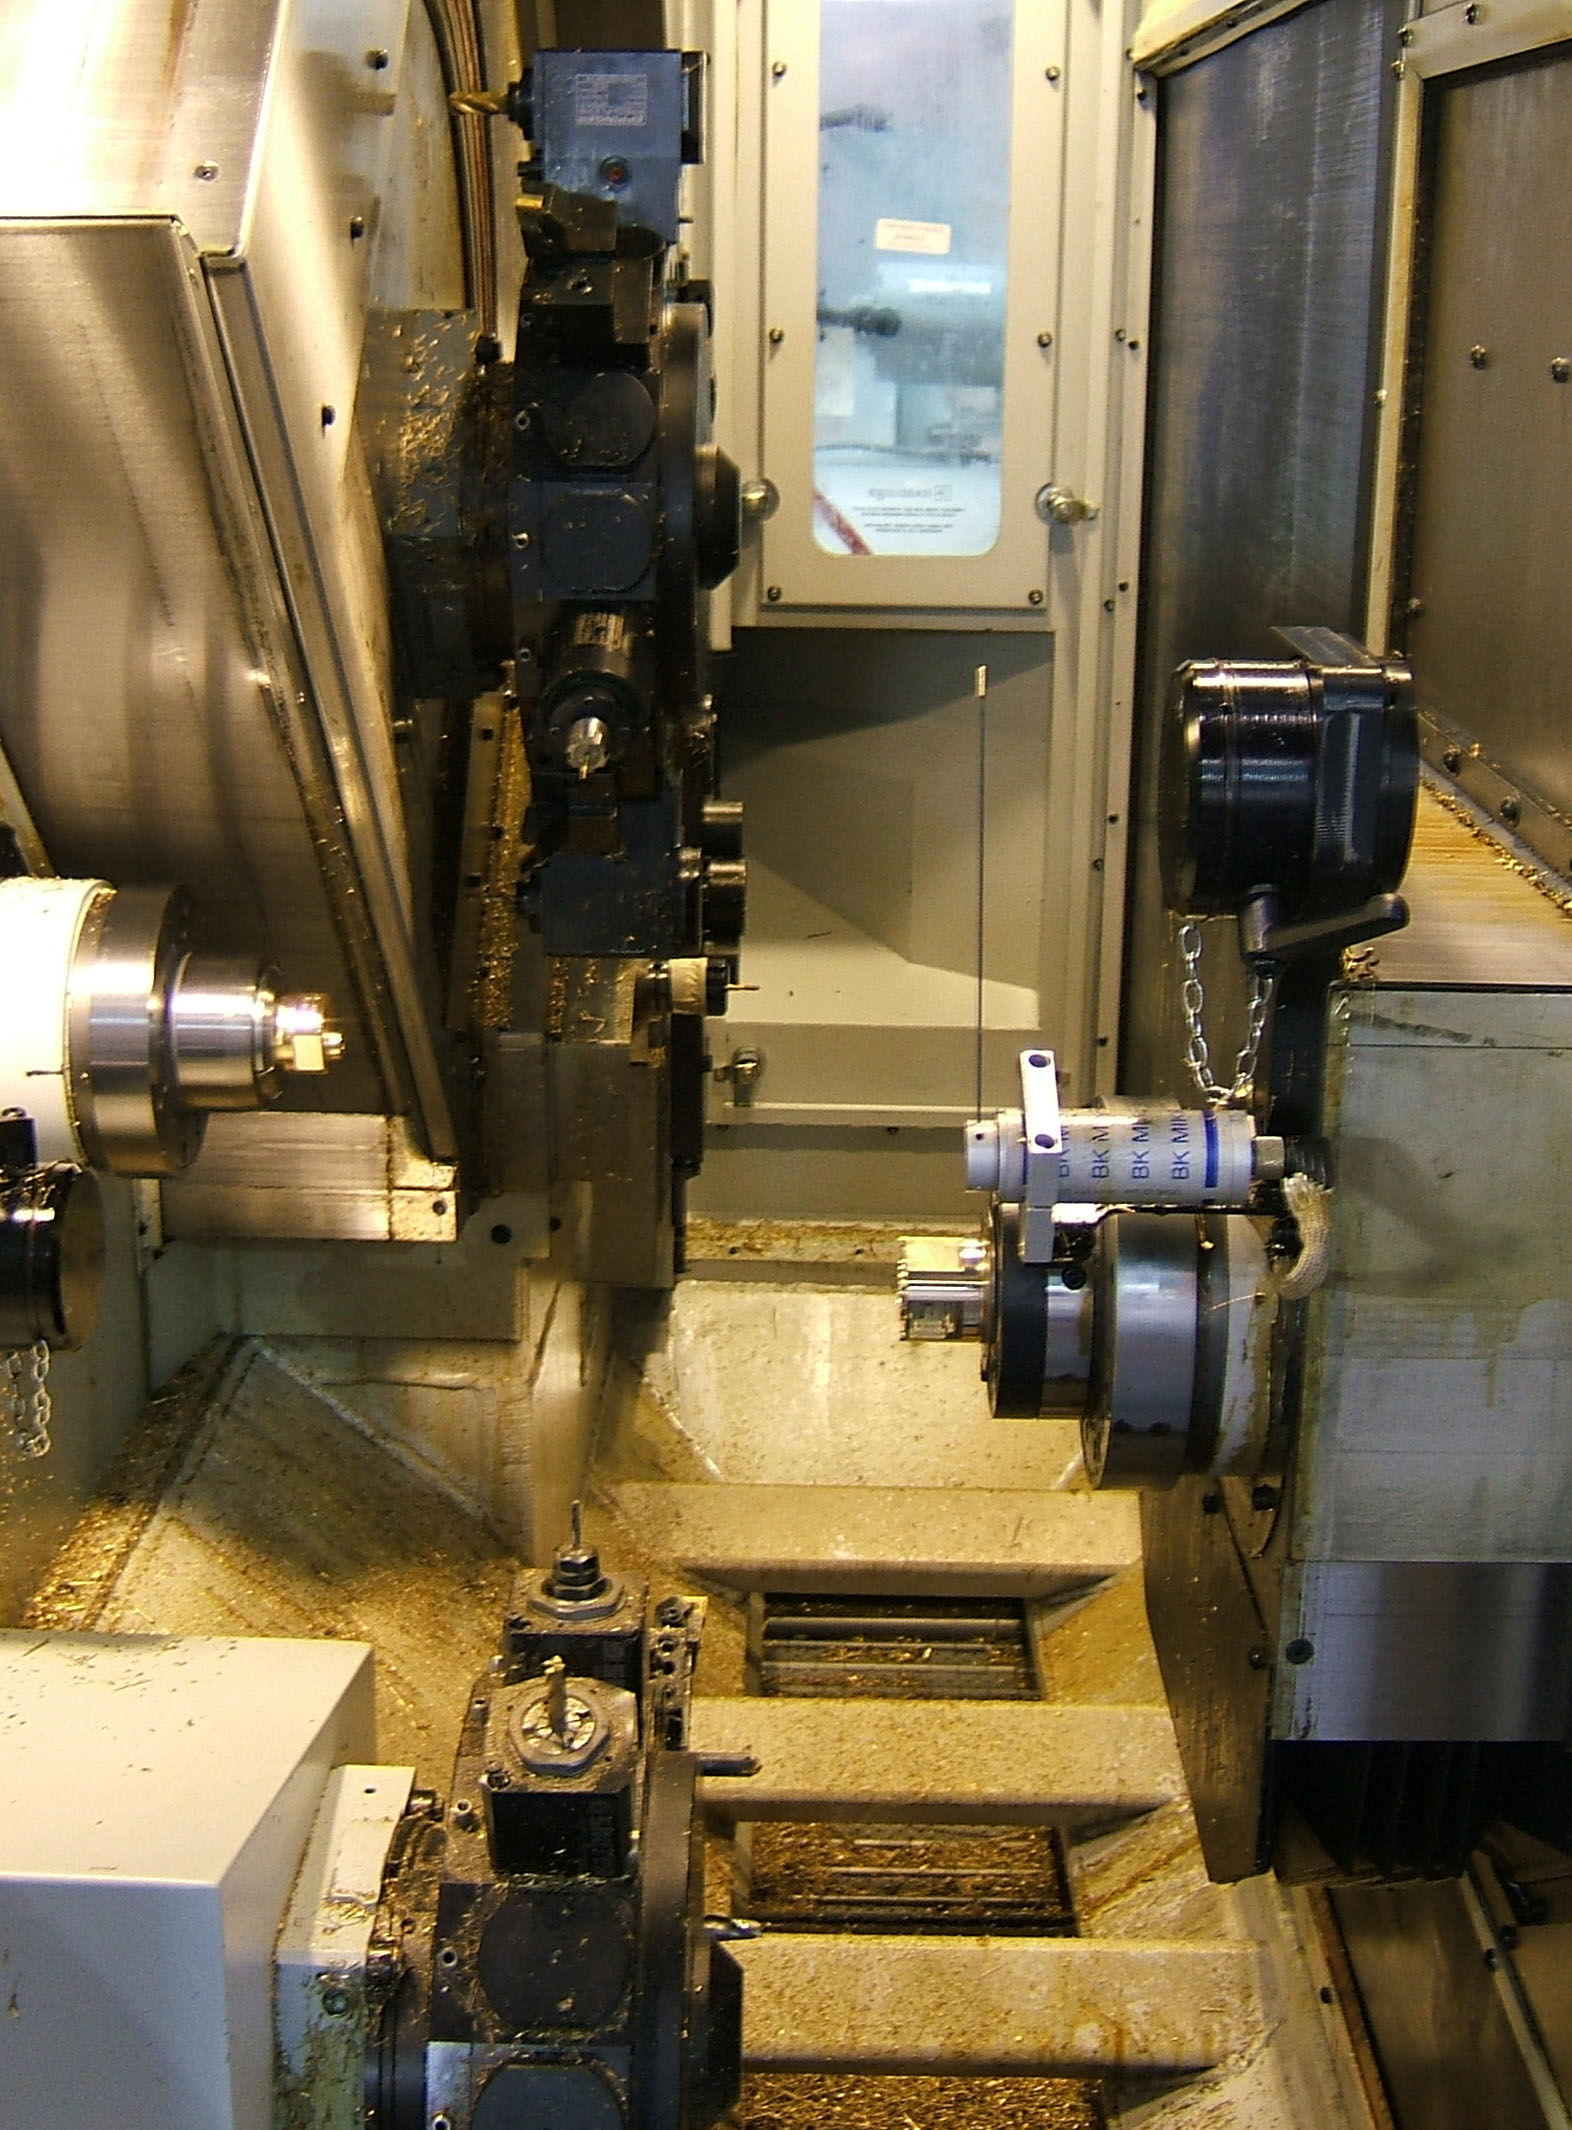 PCI in Enclosure Networked to 16 Fuji Lathes